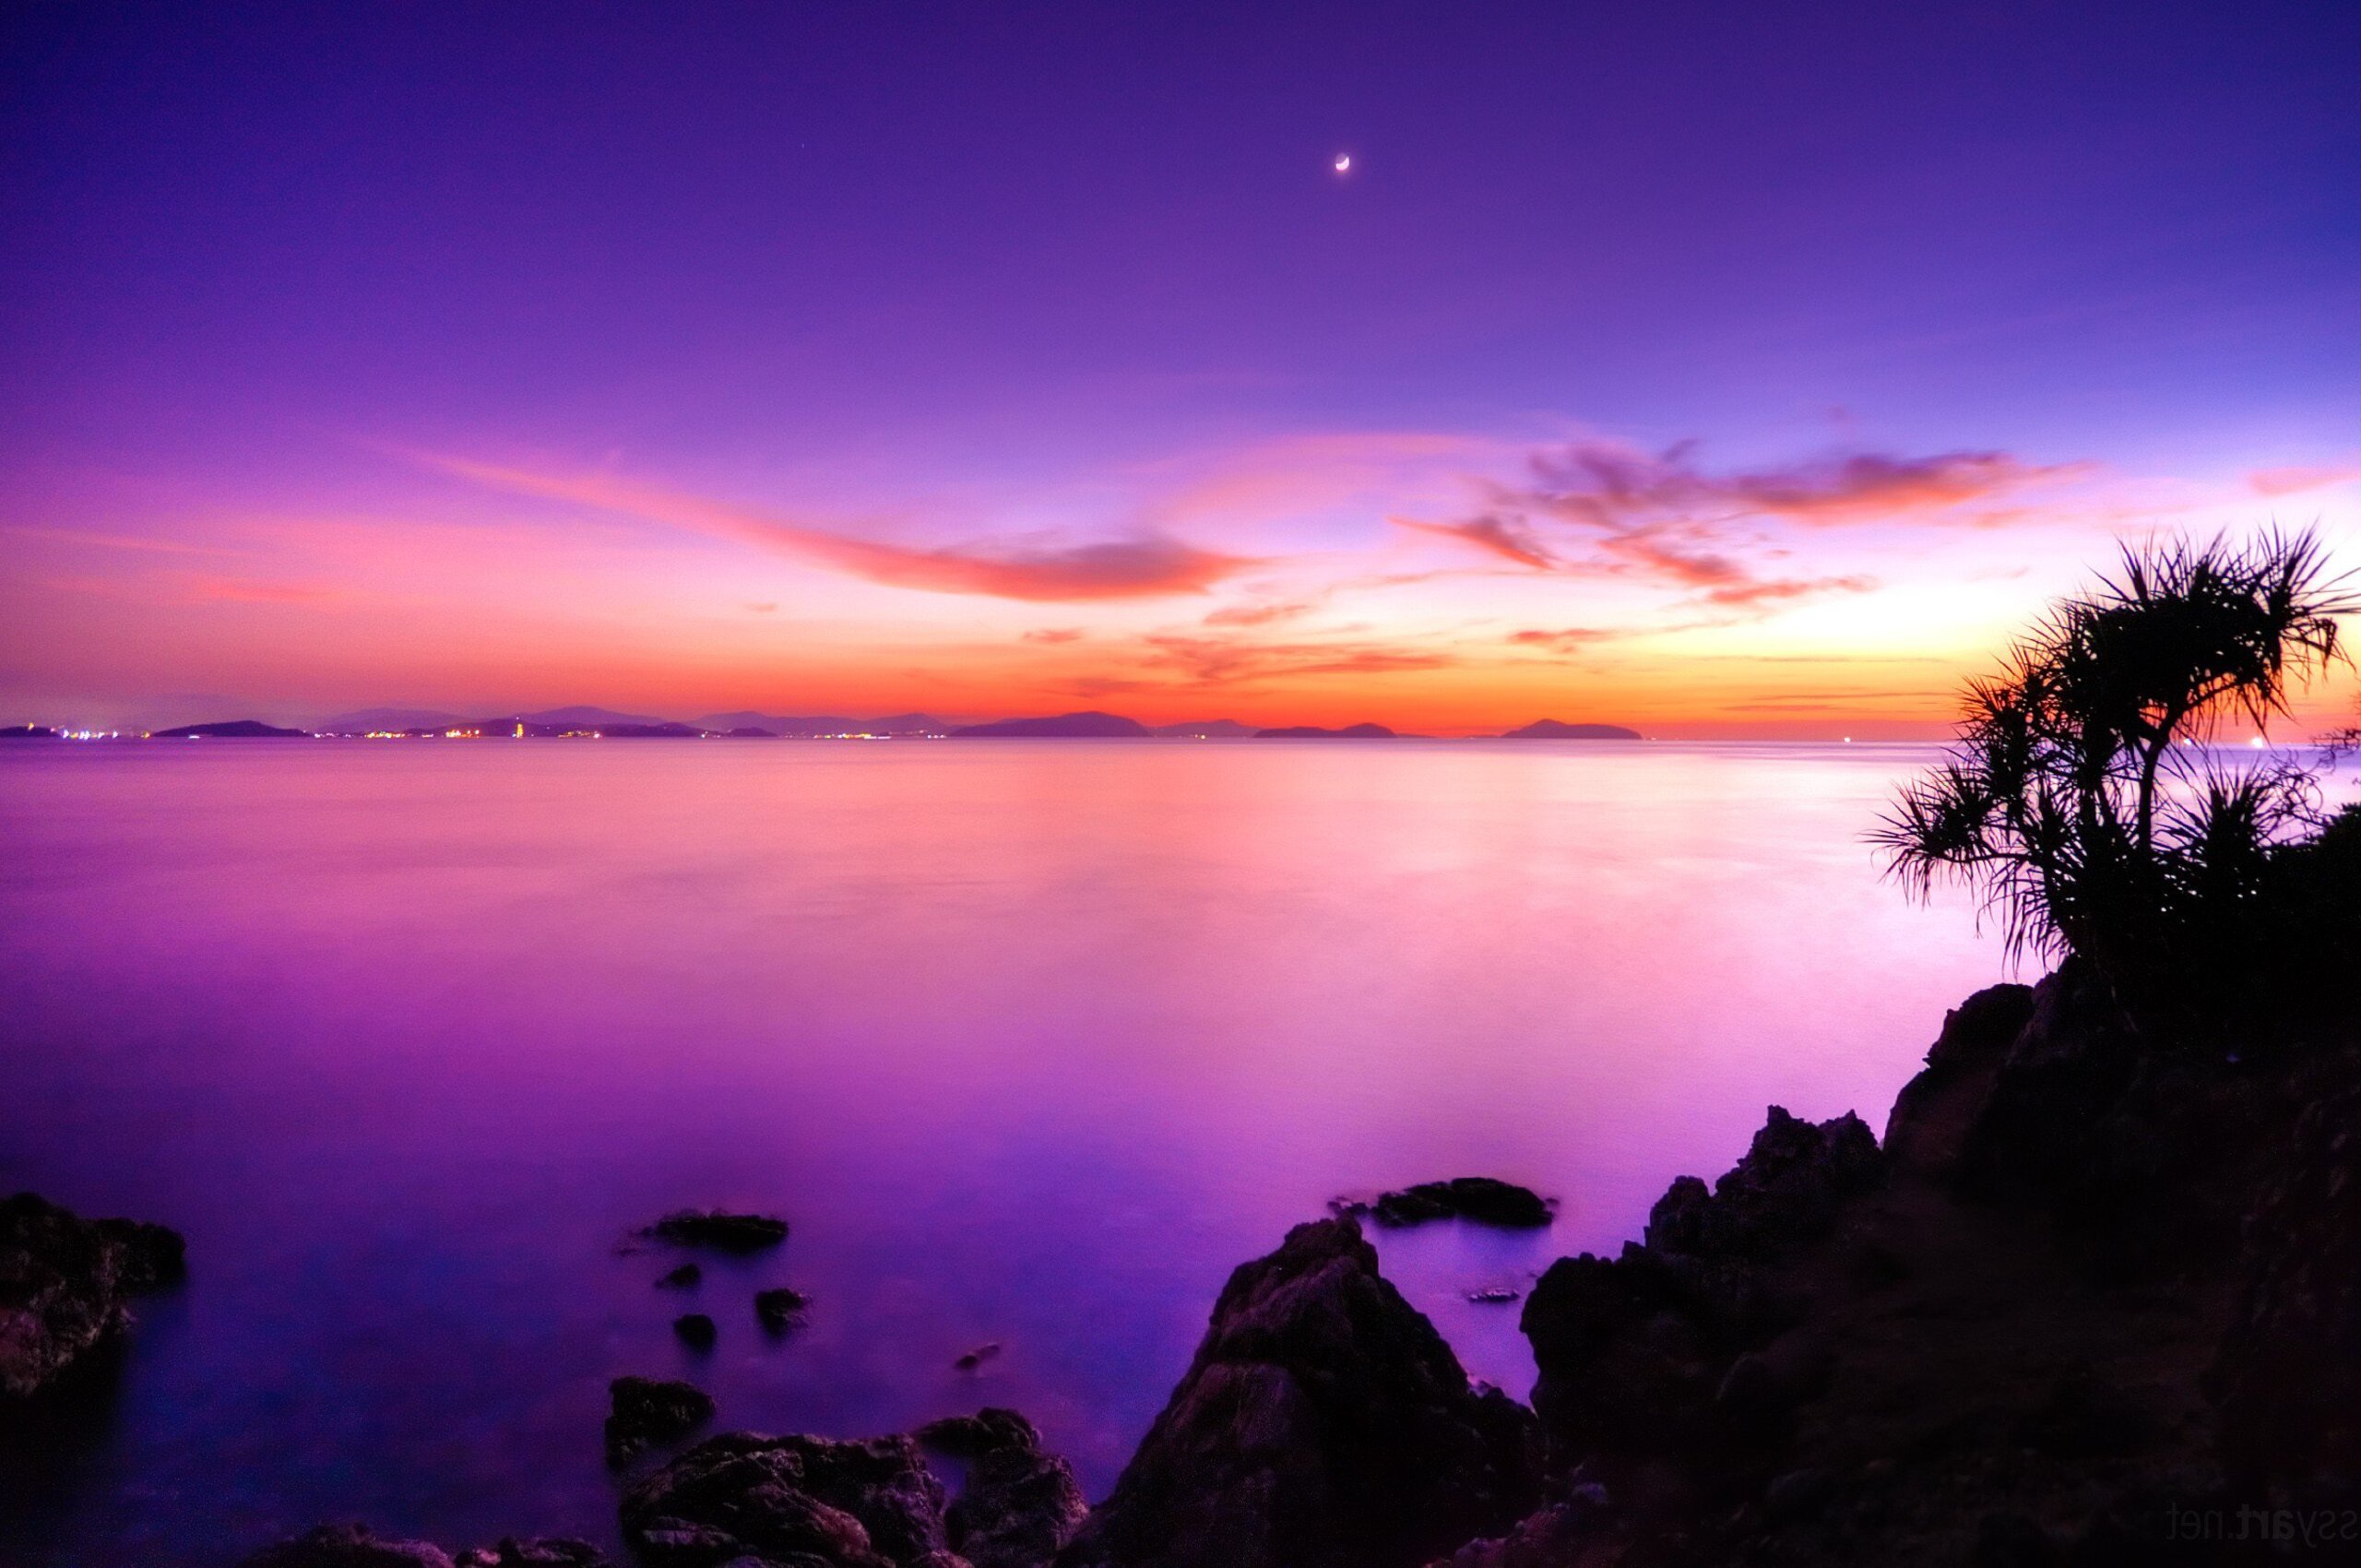 A purple sky over the ocean at sunset - Chromebook